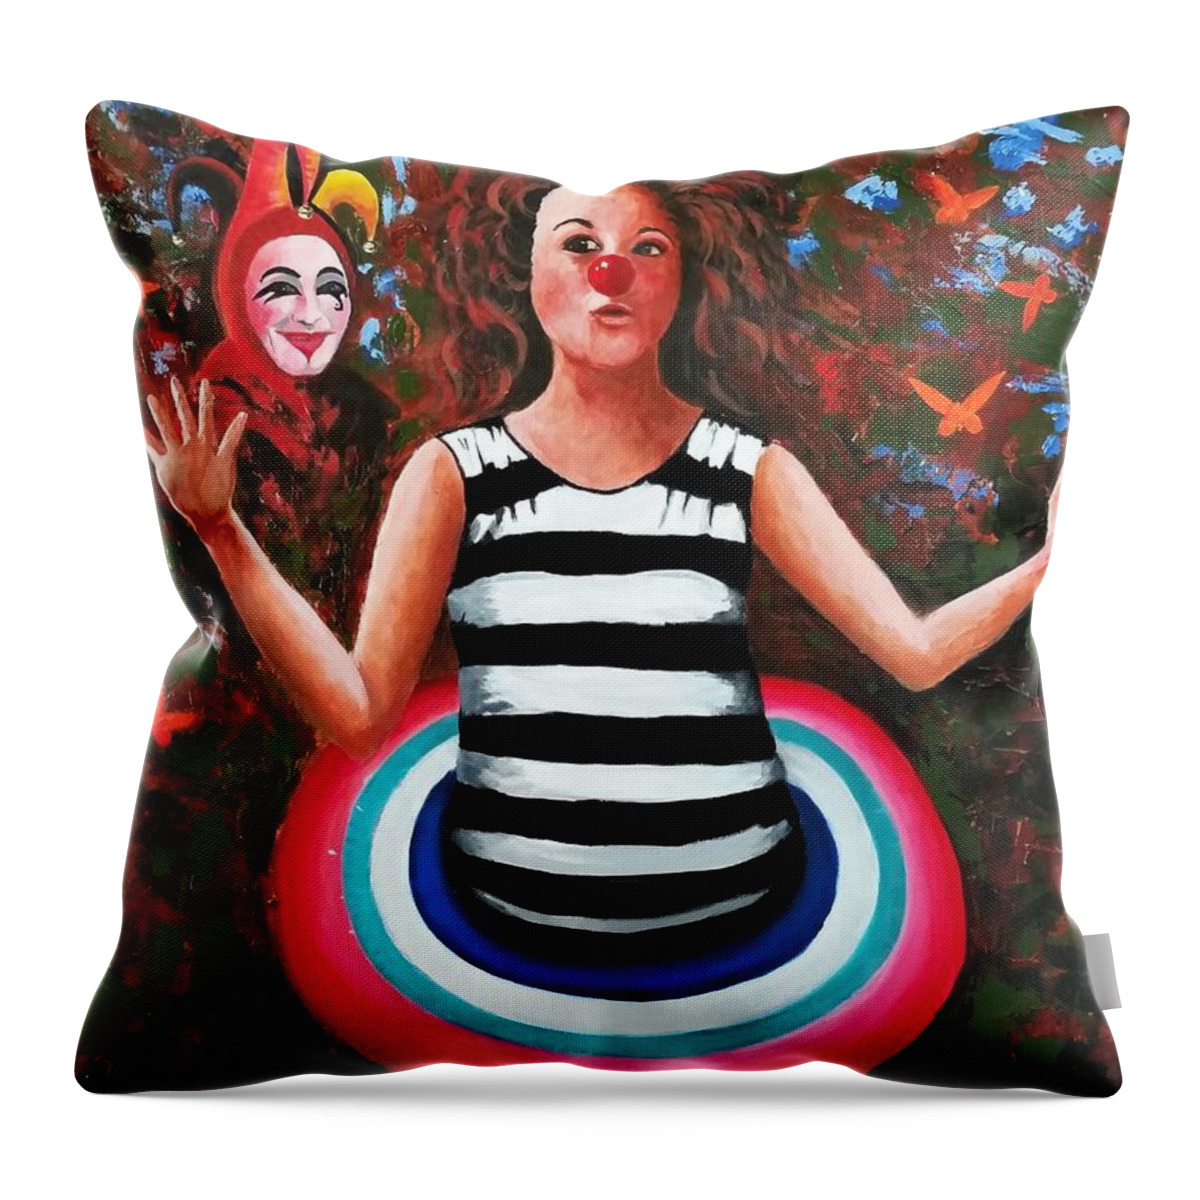 Australian Throw Pillow featuring the painting K-m by Anne Gardner